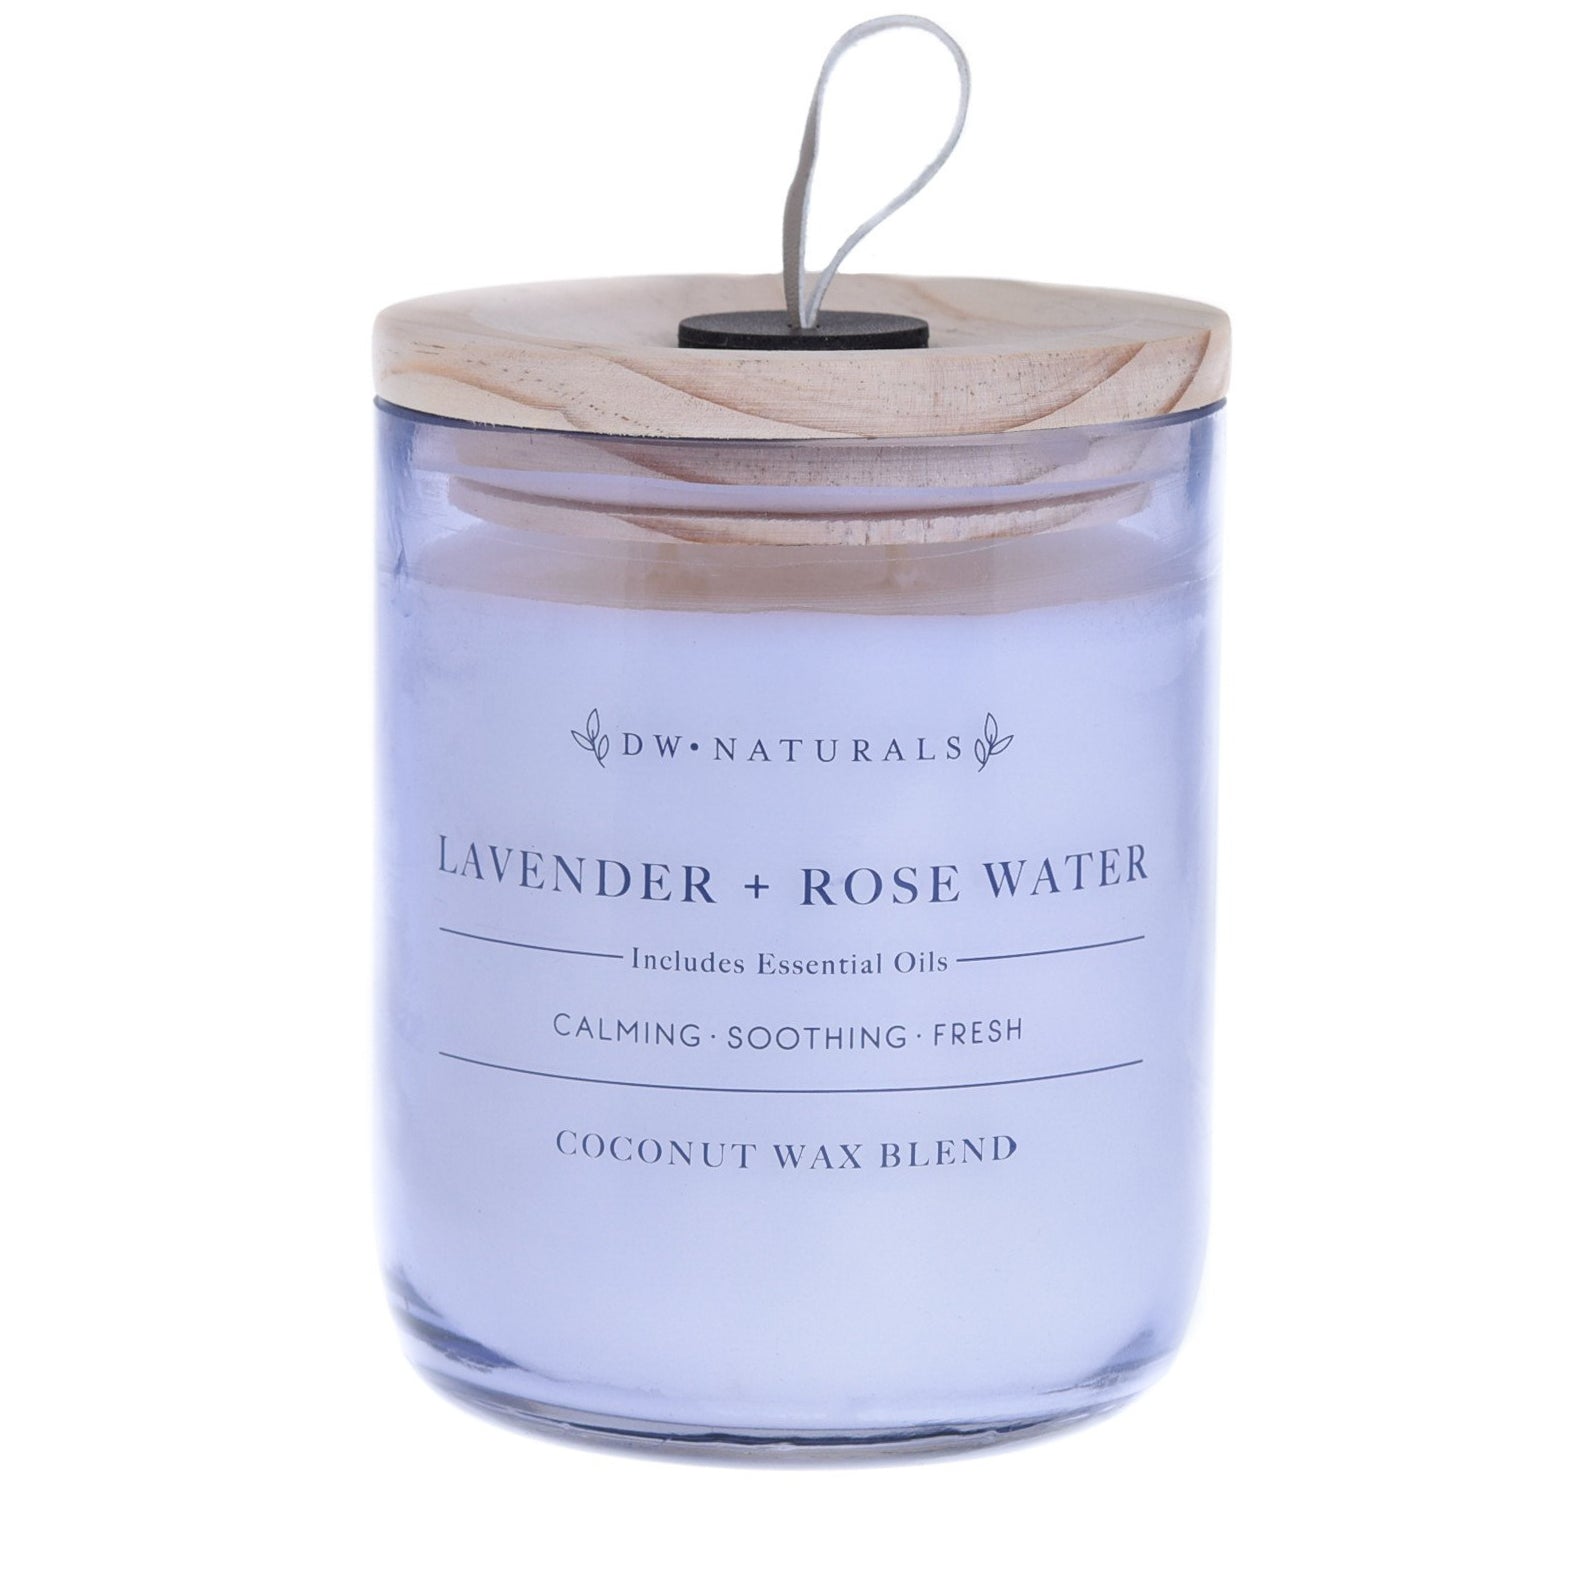  %DW-NATURALSQQ% LAVENDER ROSE WATER Includcs Essential Oils CALMING - SOOTHING - FRESH COCONUT WAX BLEND 3 